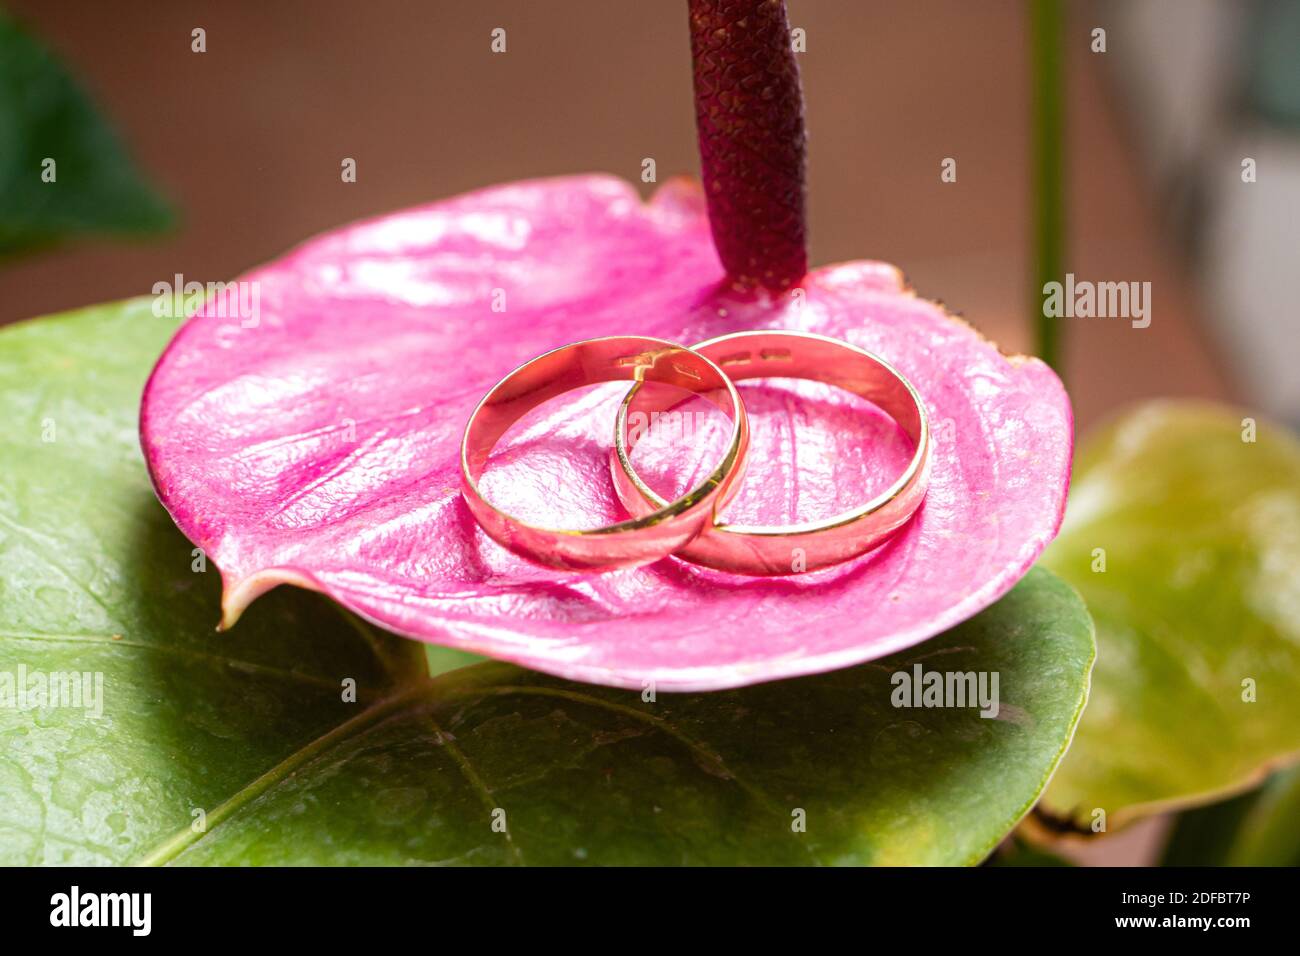 Wedding rings of the bride and groom on a beautiful pink flower on the wedding day. Wedding traditions Stock Photo